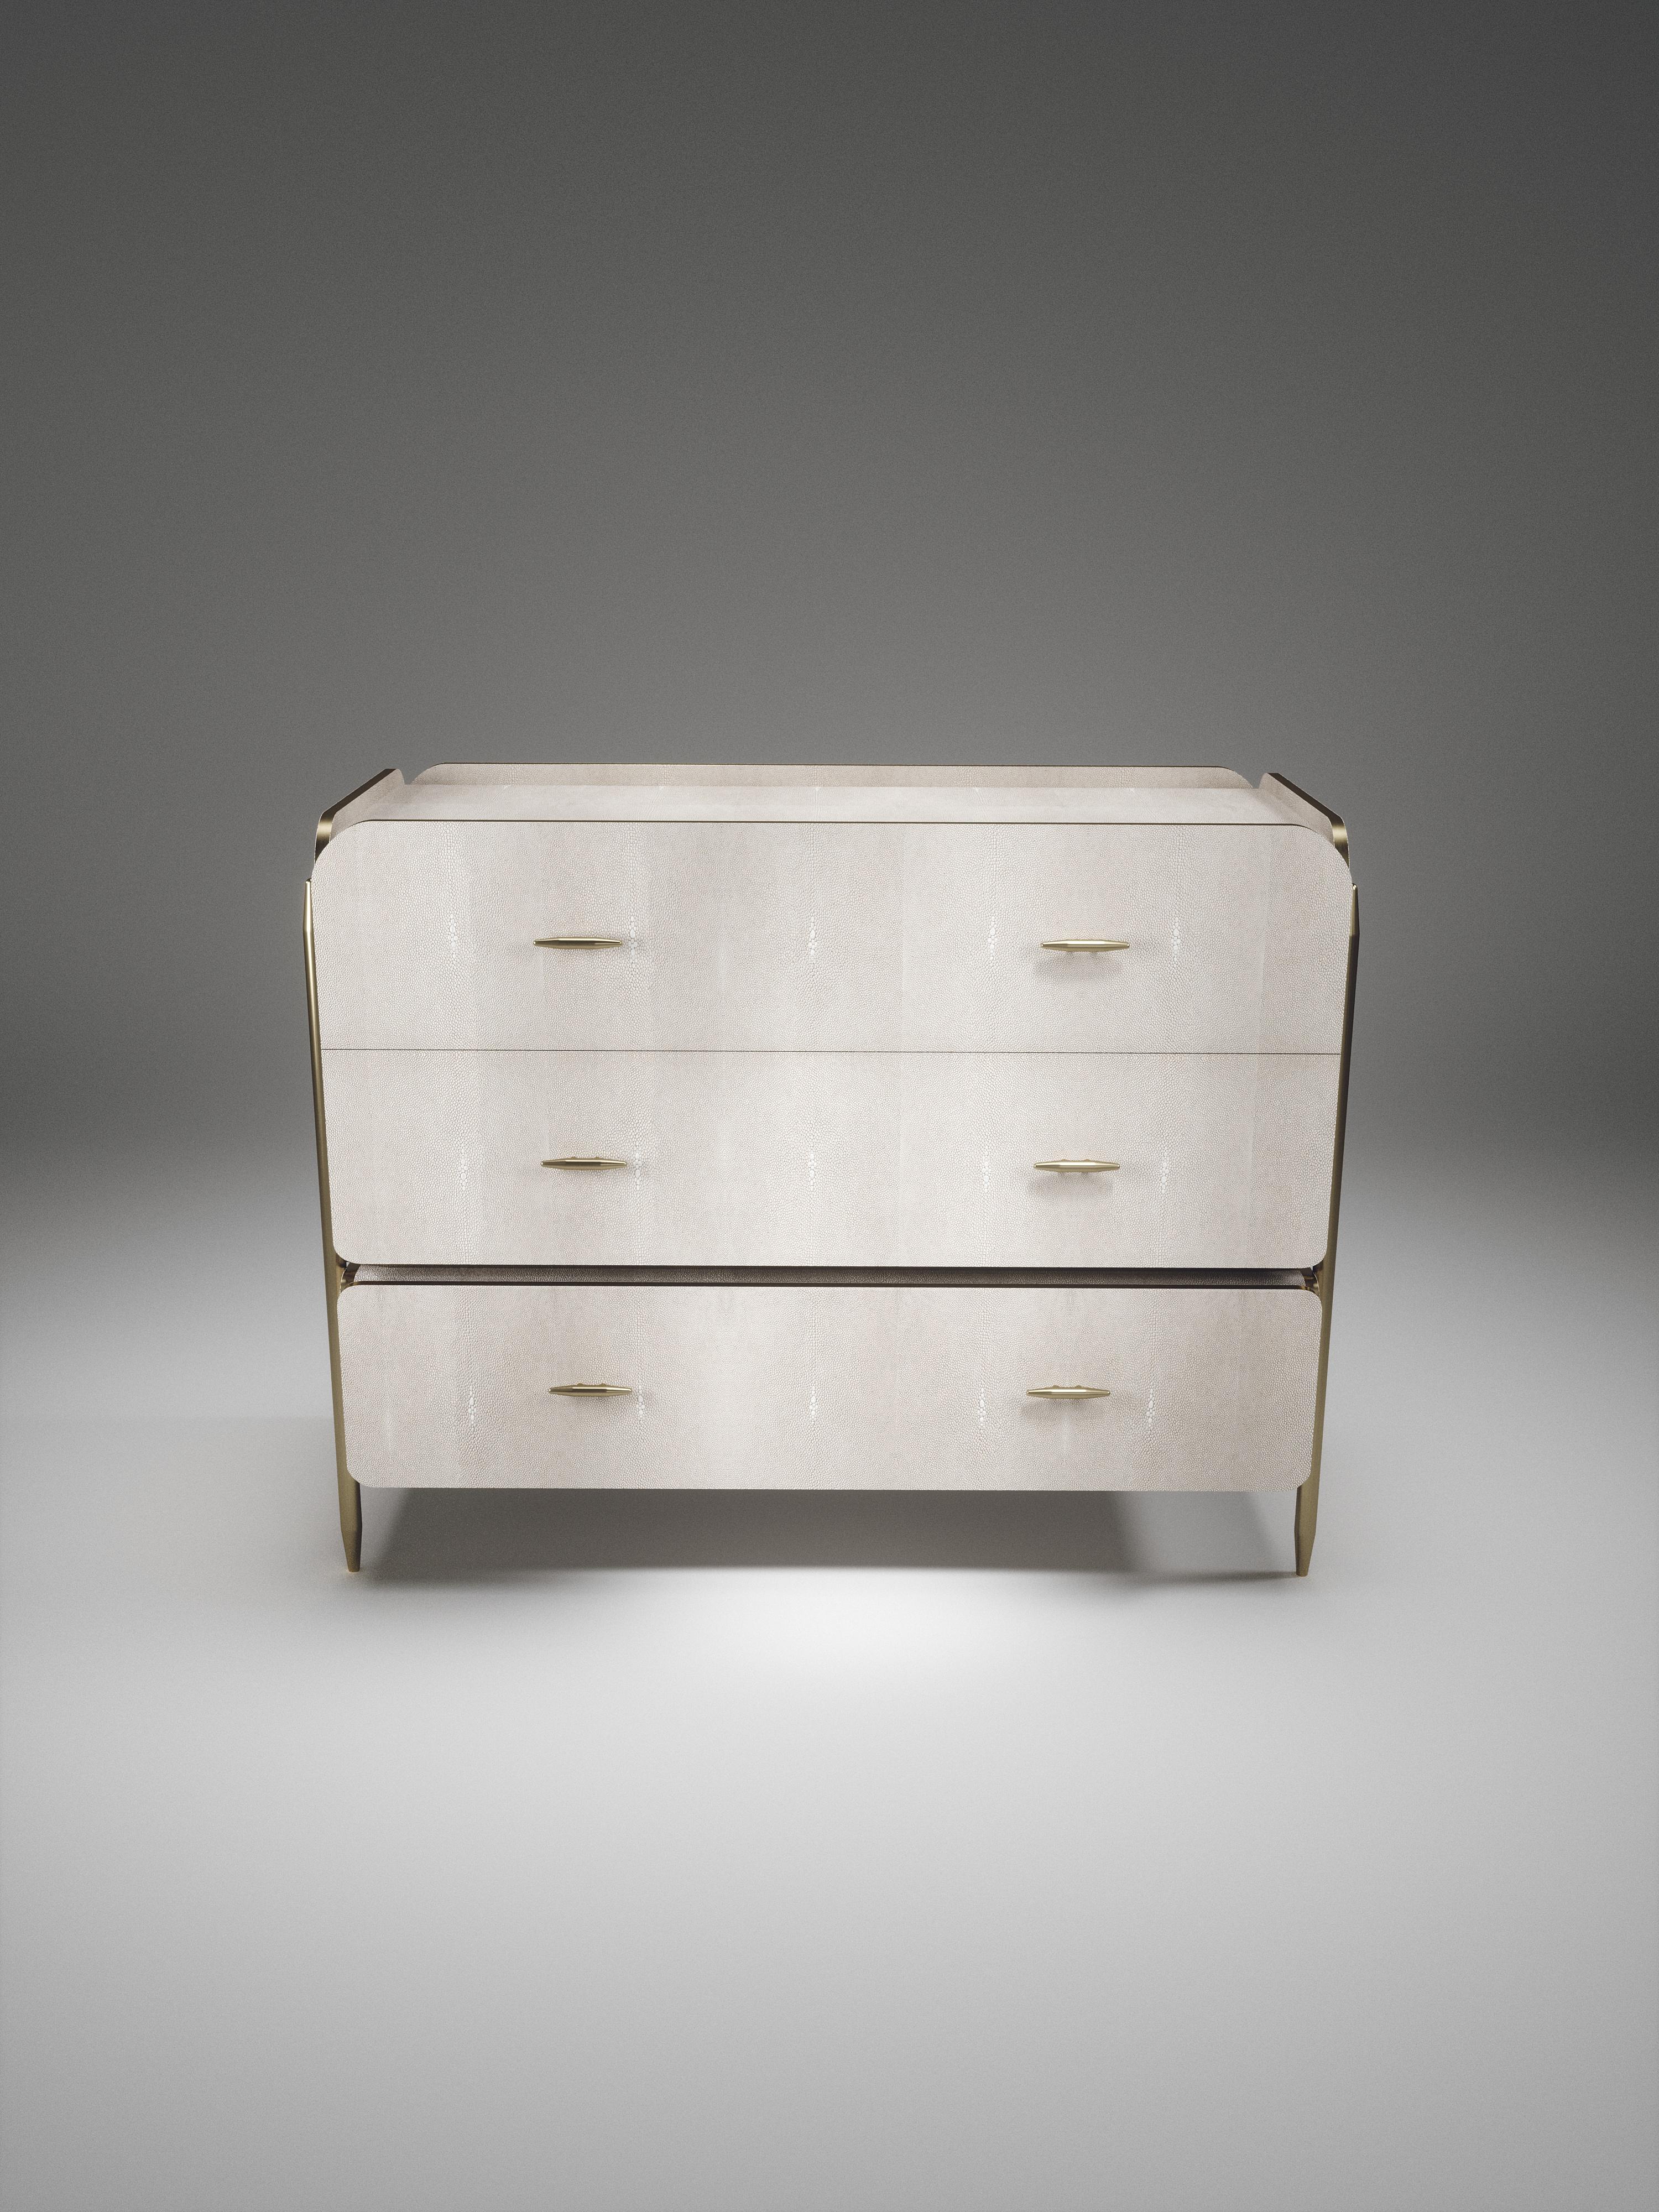 The Dandy Rectangle Chest of Drawers by Kifu Paris is an elegant and a luxurious home accent, inlaid in cream shagreen with bronze-patina brass details. This piece includes 3 drawers total and the interiors are inlaid in gemelina wood veneer. The